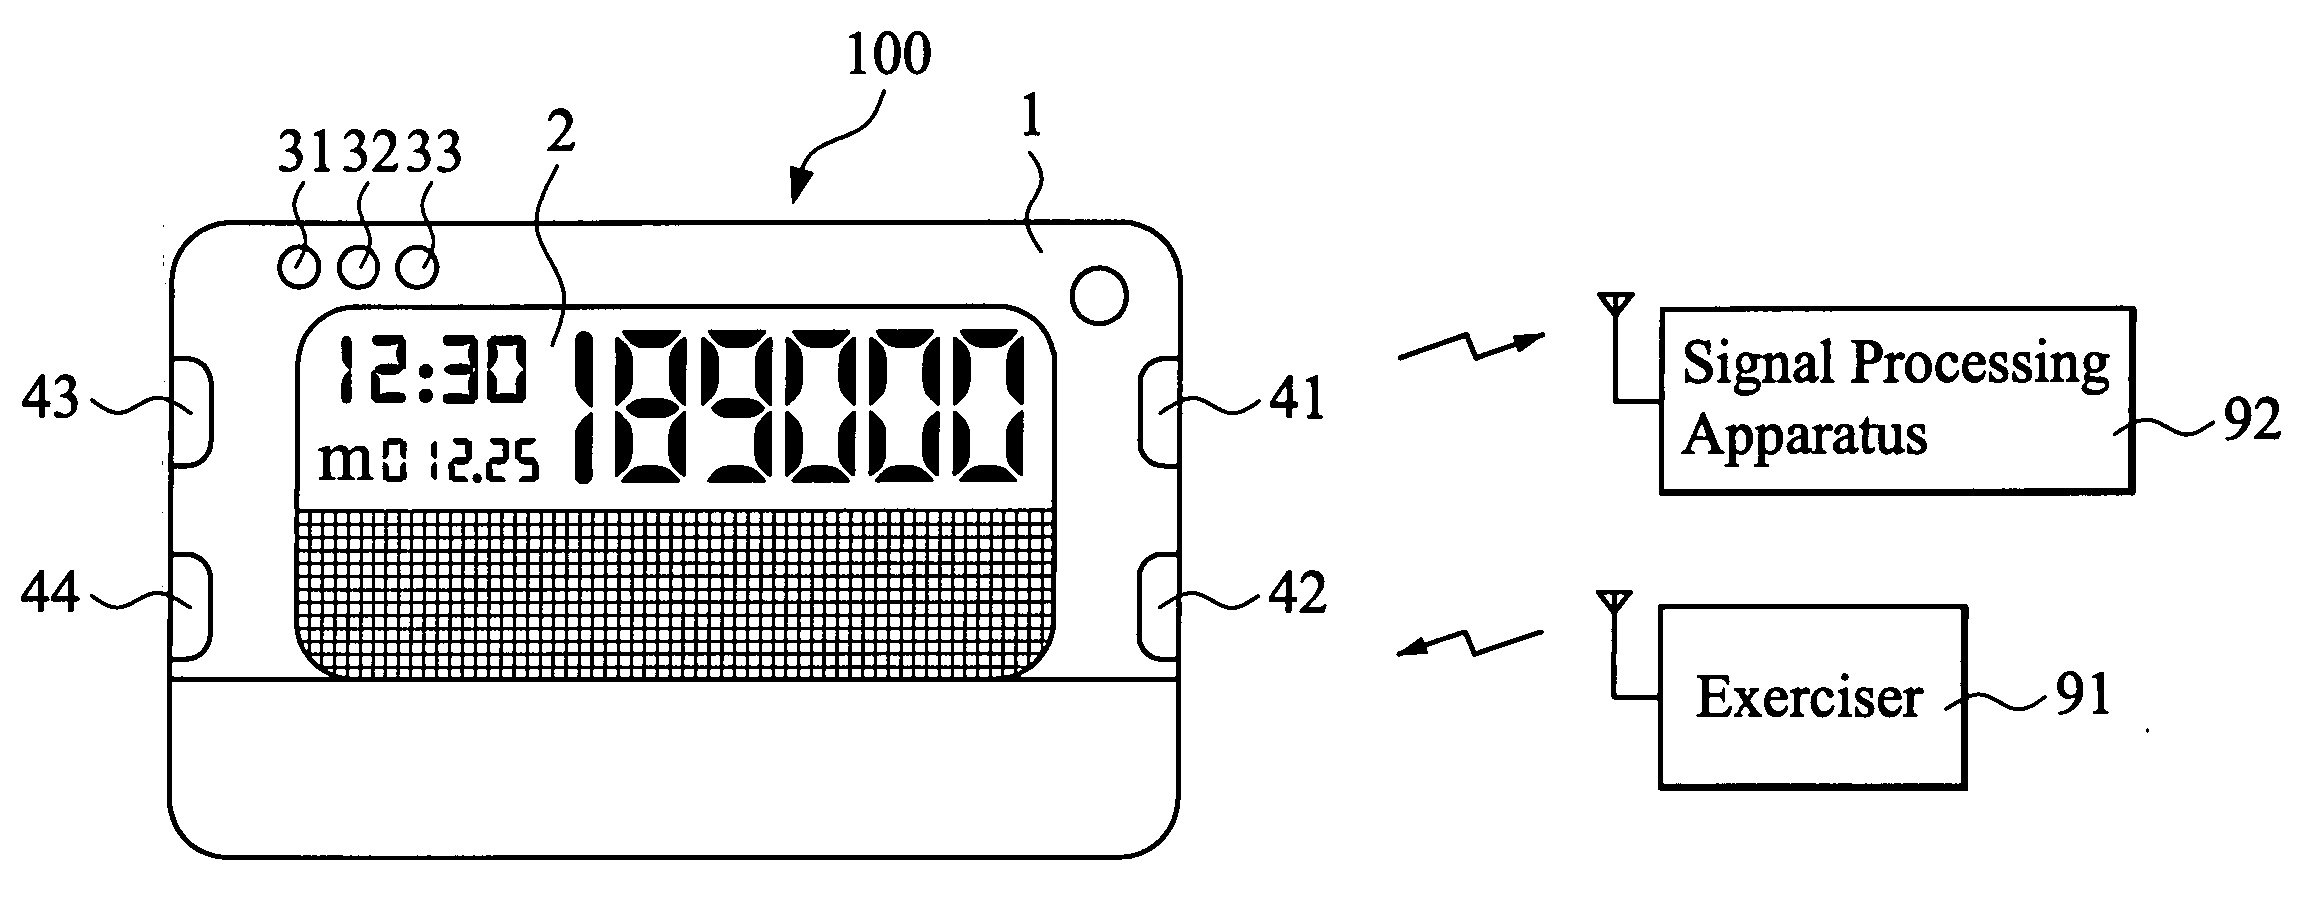 Portable health information displaying and managing device